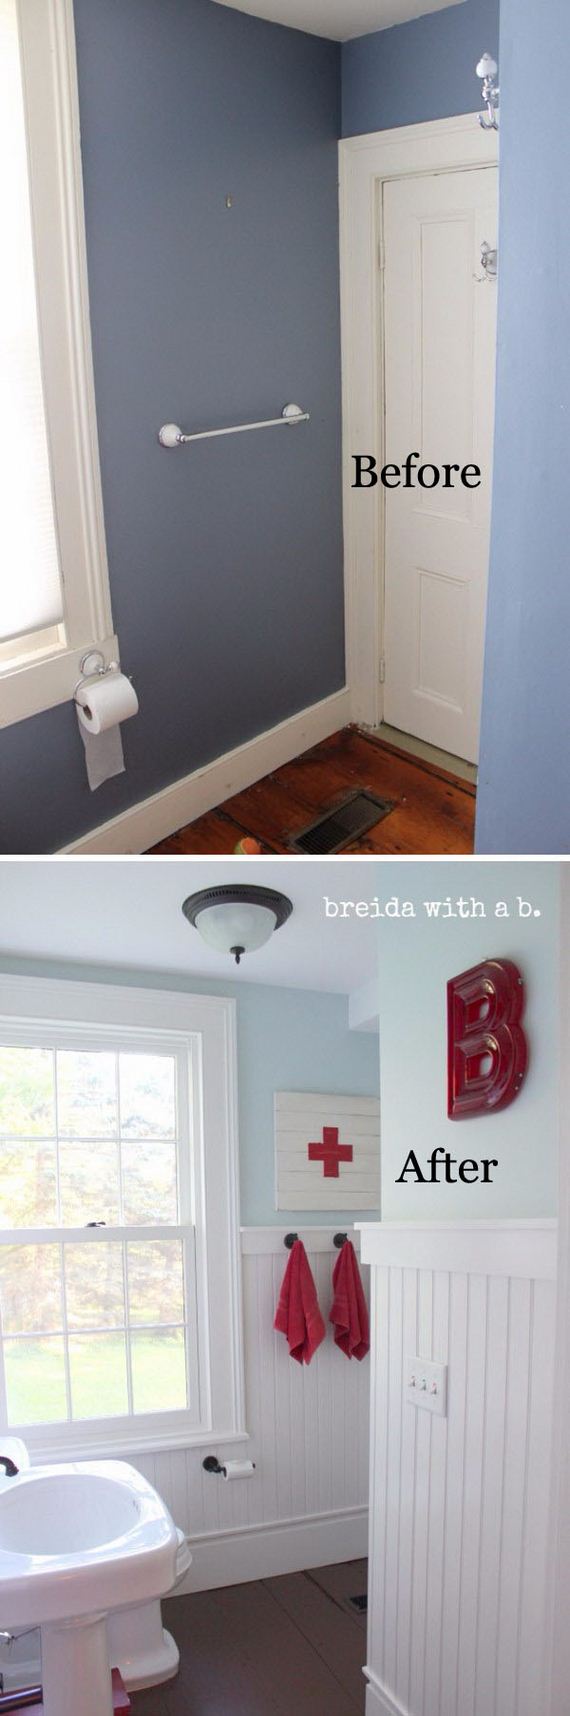 25-awesome-bathroom-makeovers